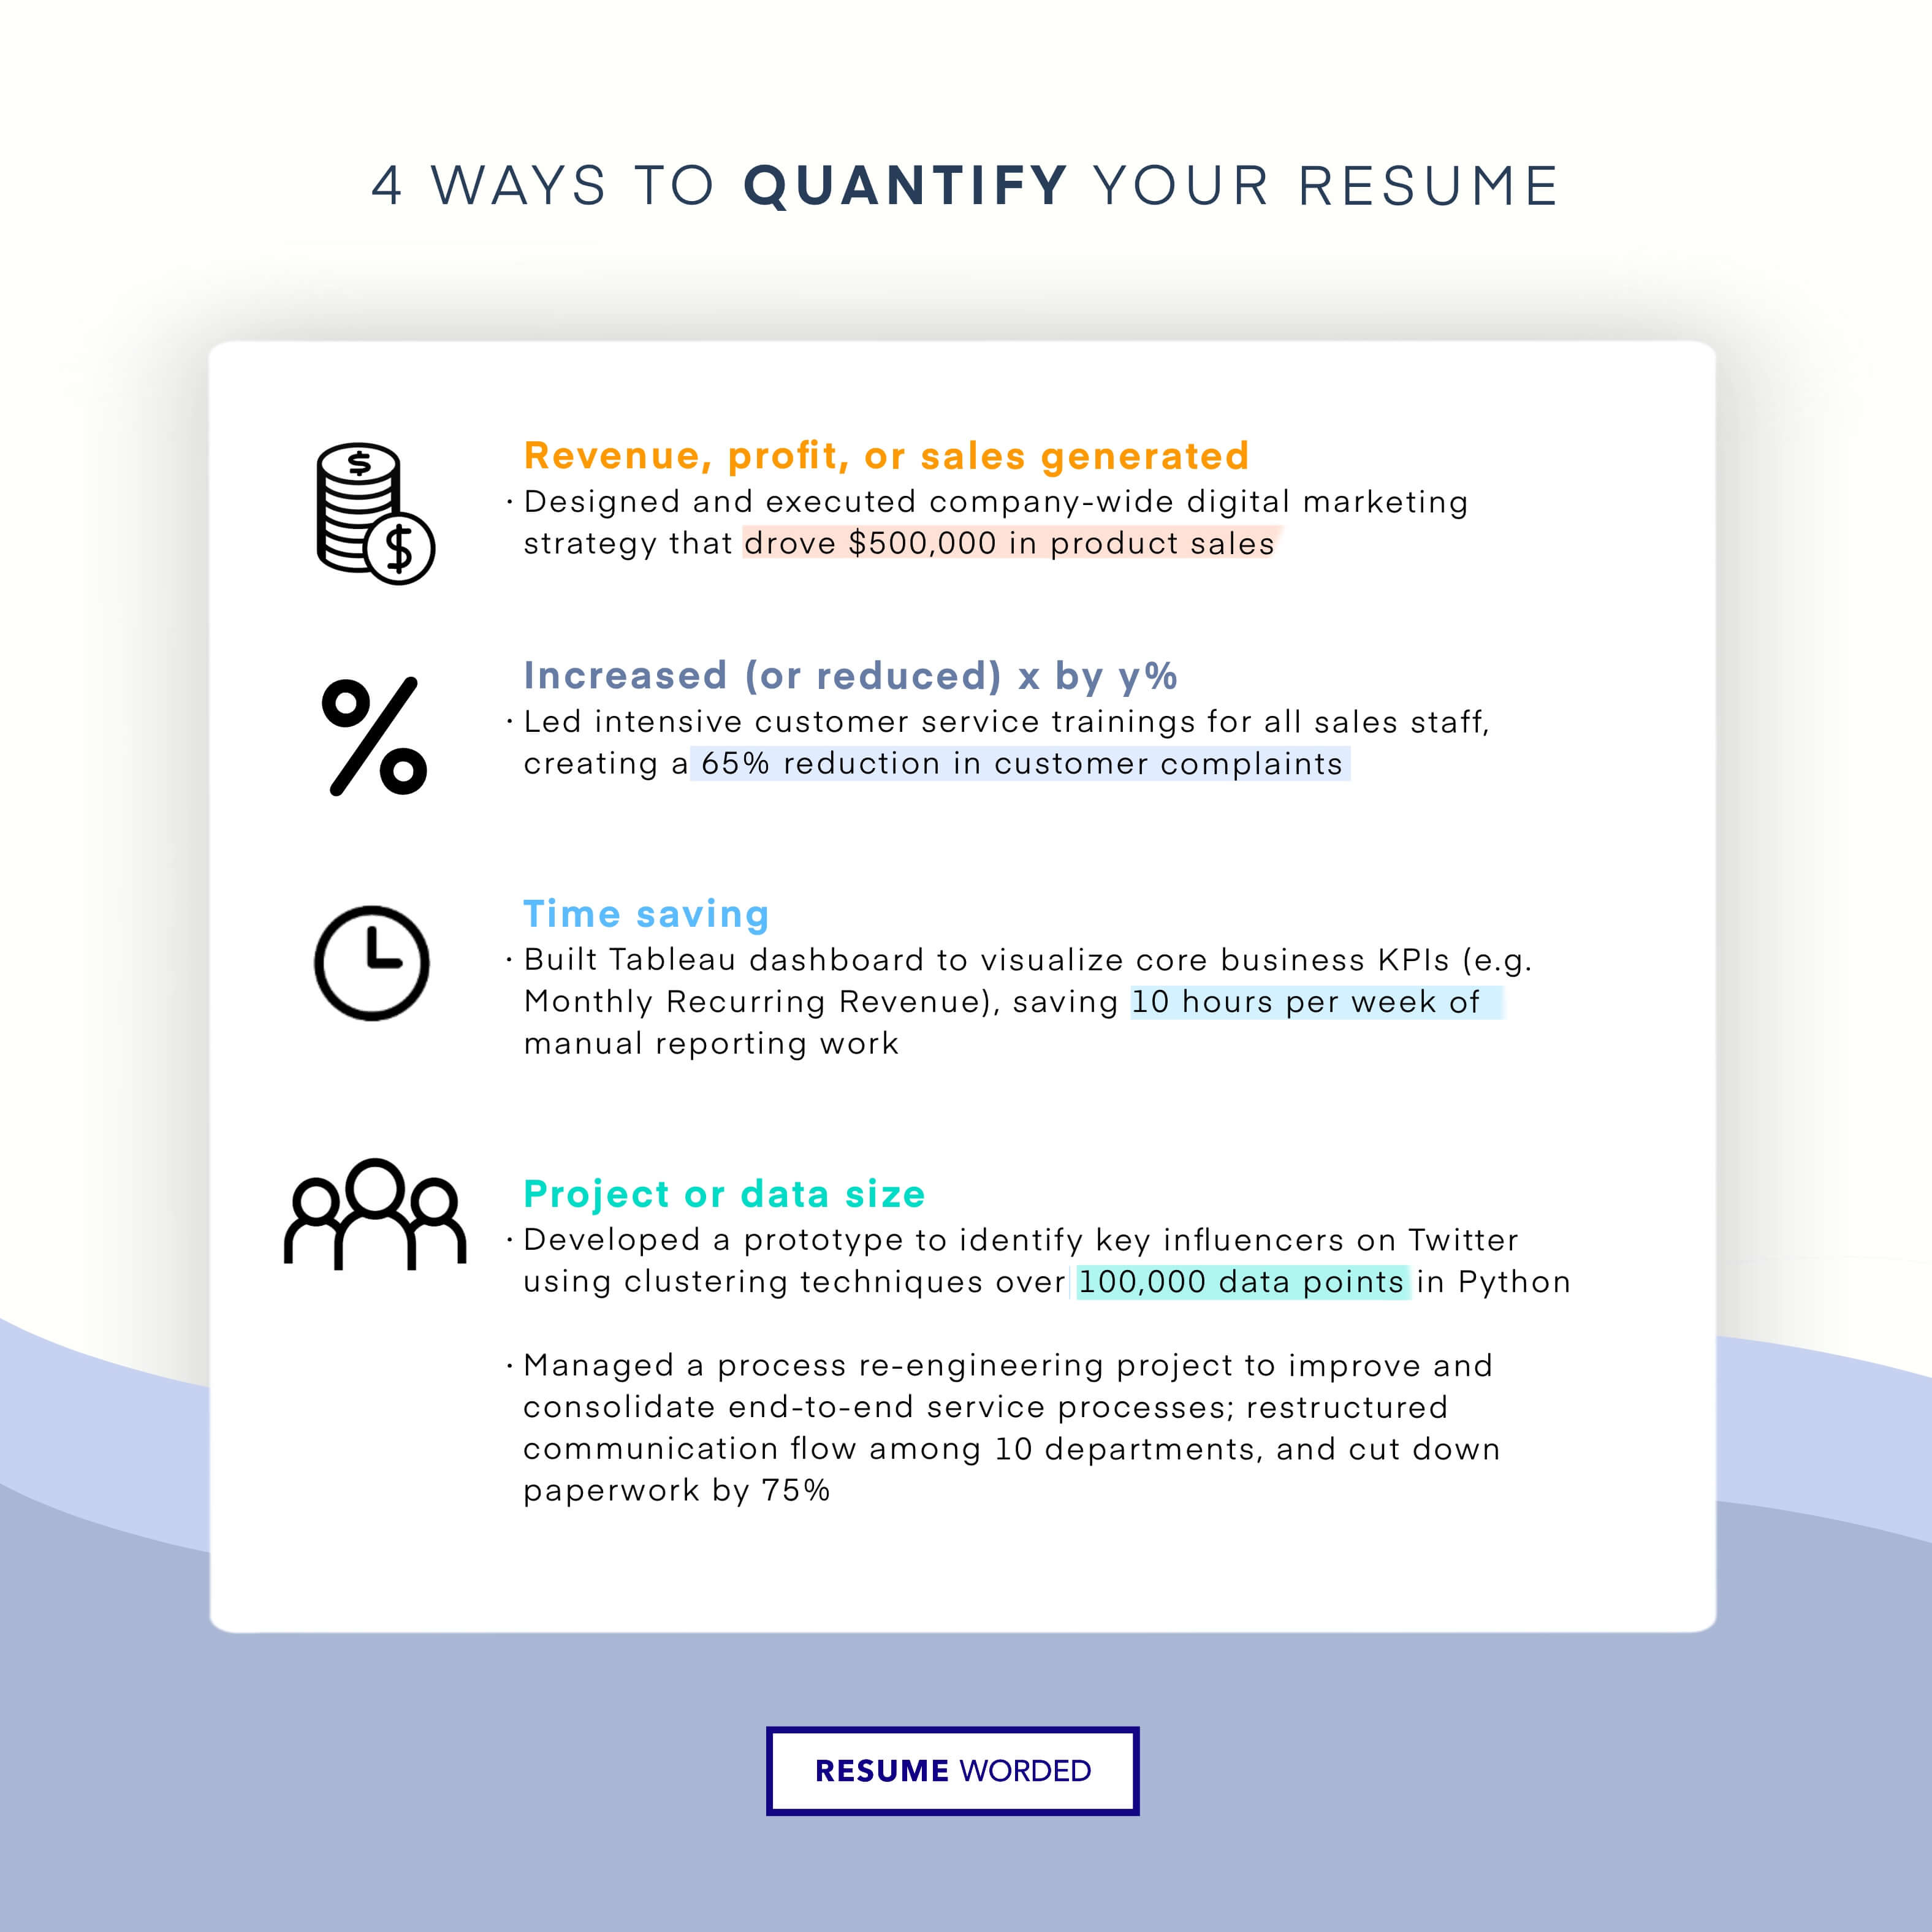 Four effective ways you can quantify your resume, with examples